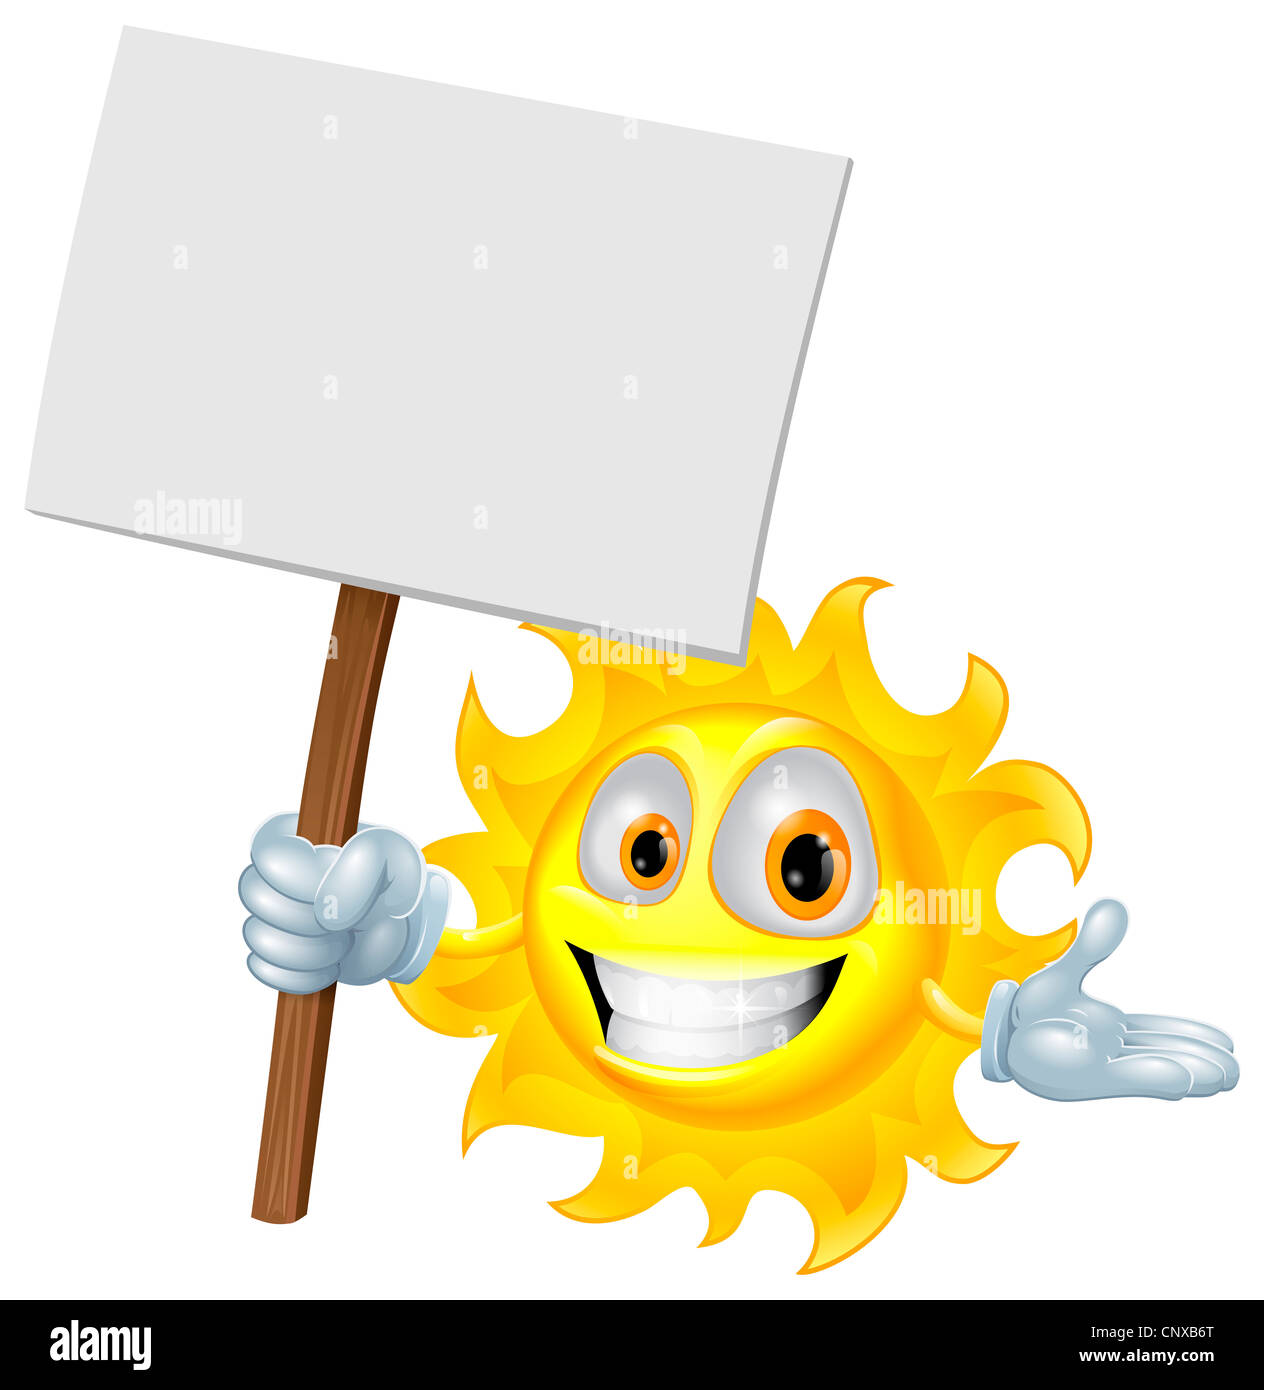 Illustration of a sun character holding a sign board Stock Photo